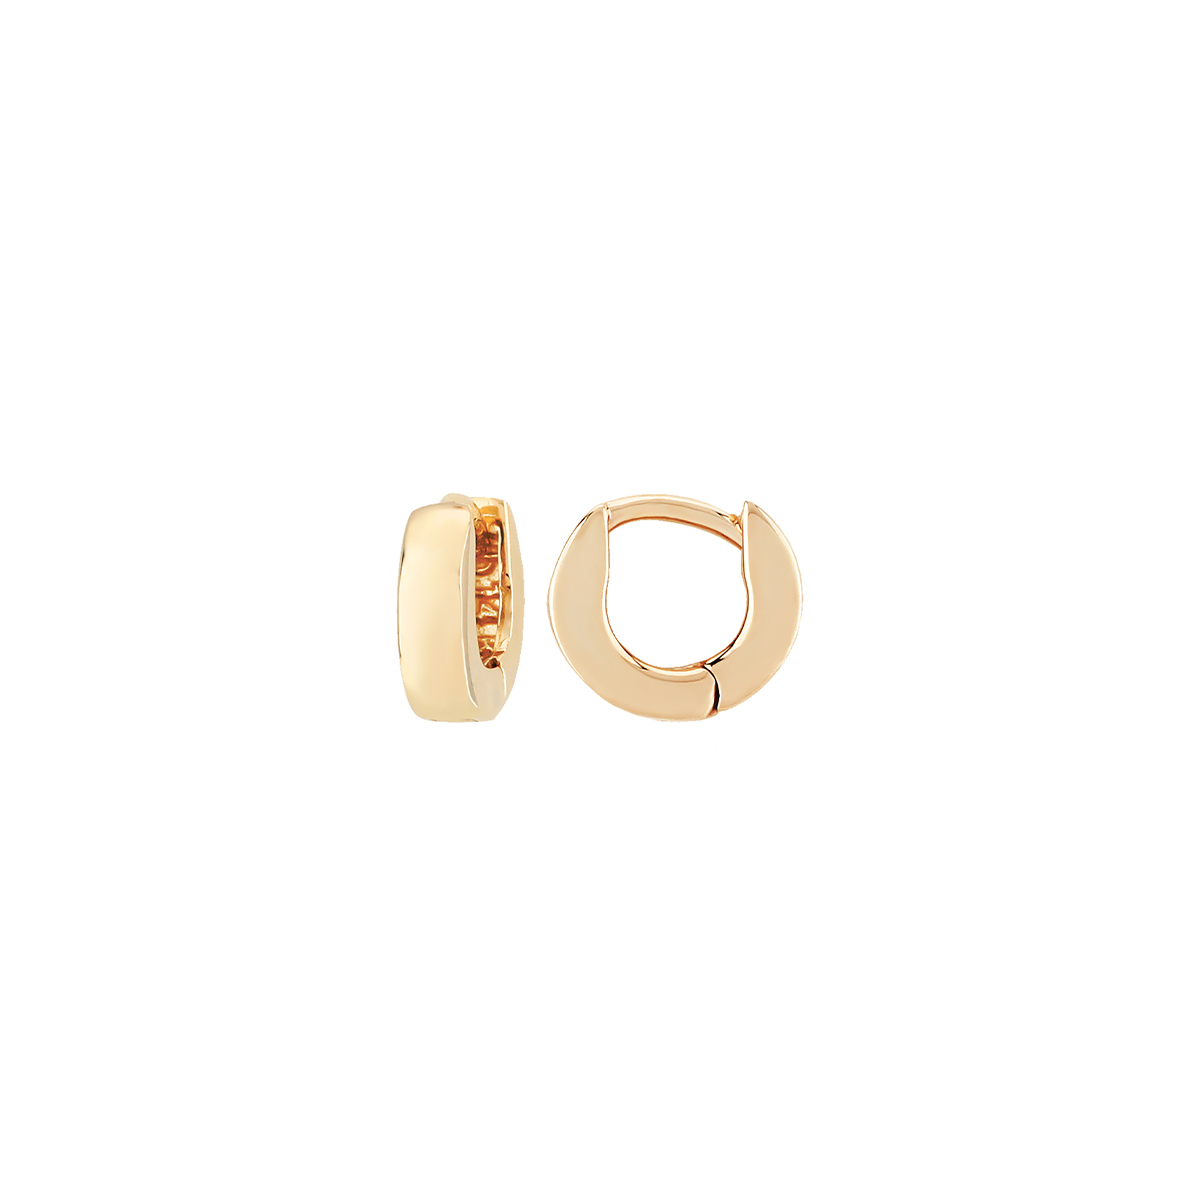 14K Yellow Gold Extra Small 3 mm Hoop Earrings